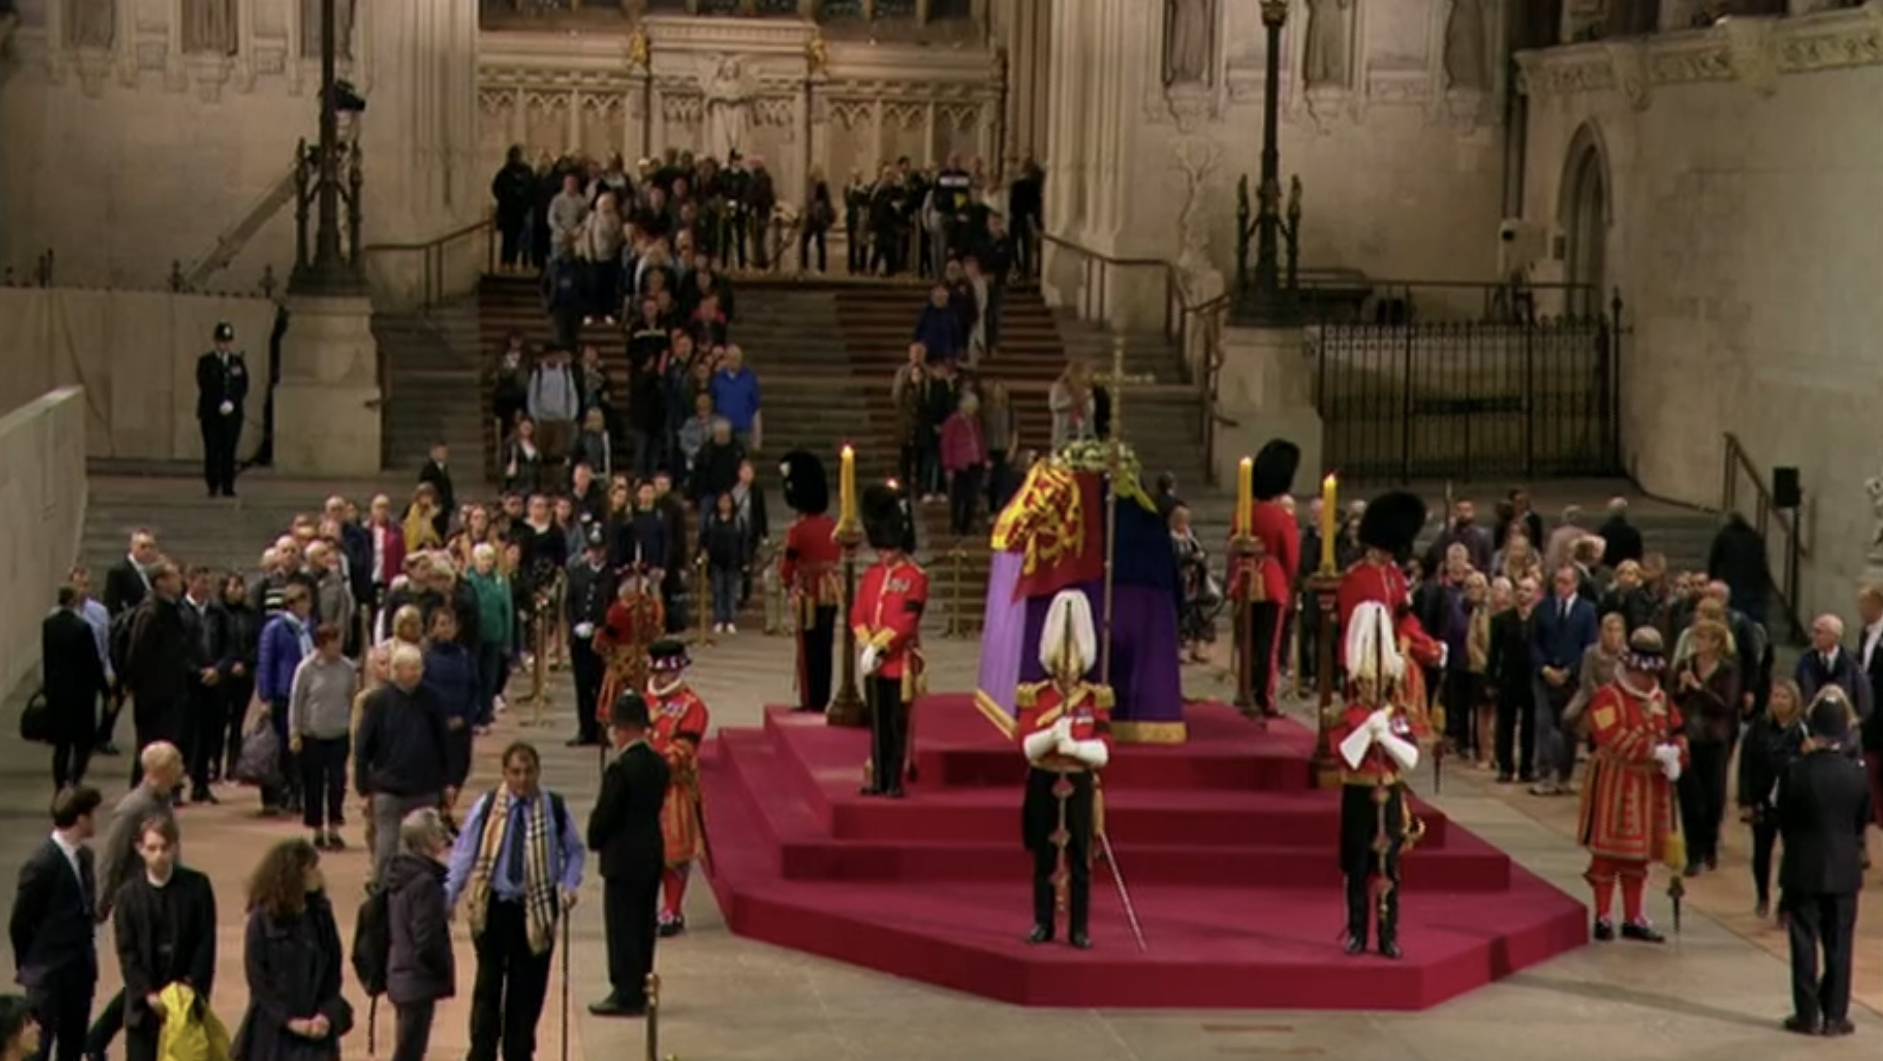 Lying-in-state inside Westminster Hall in London